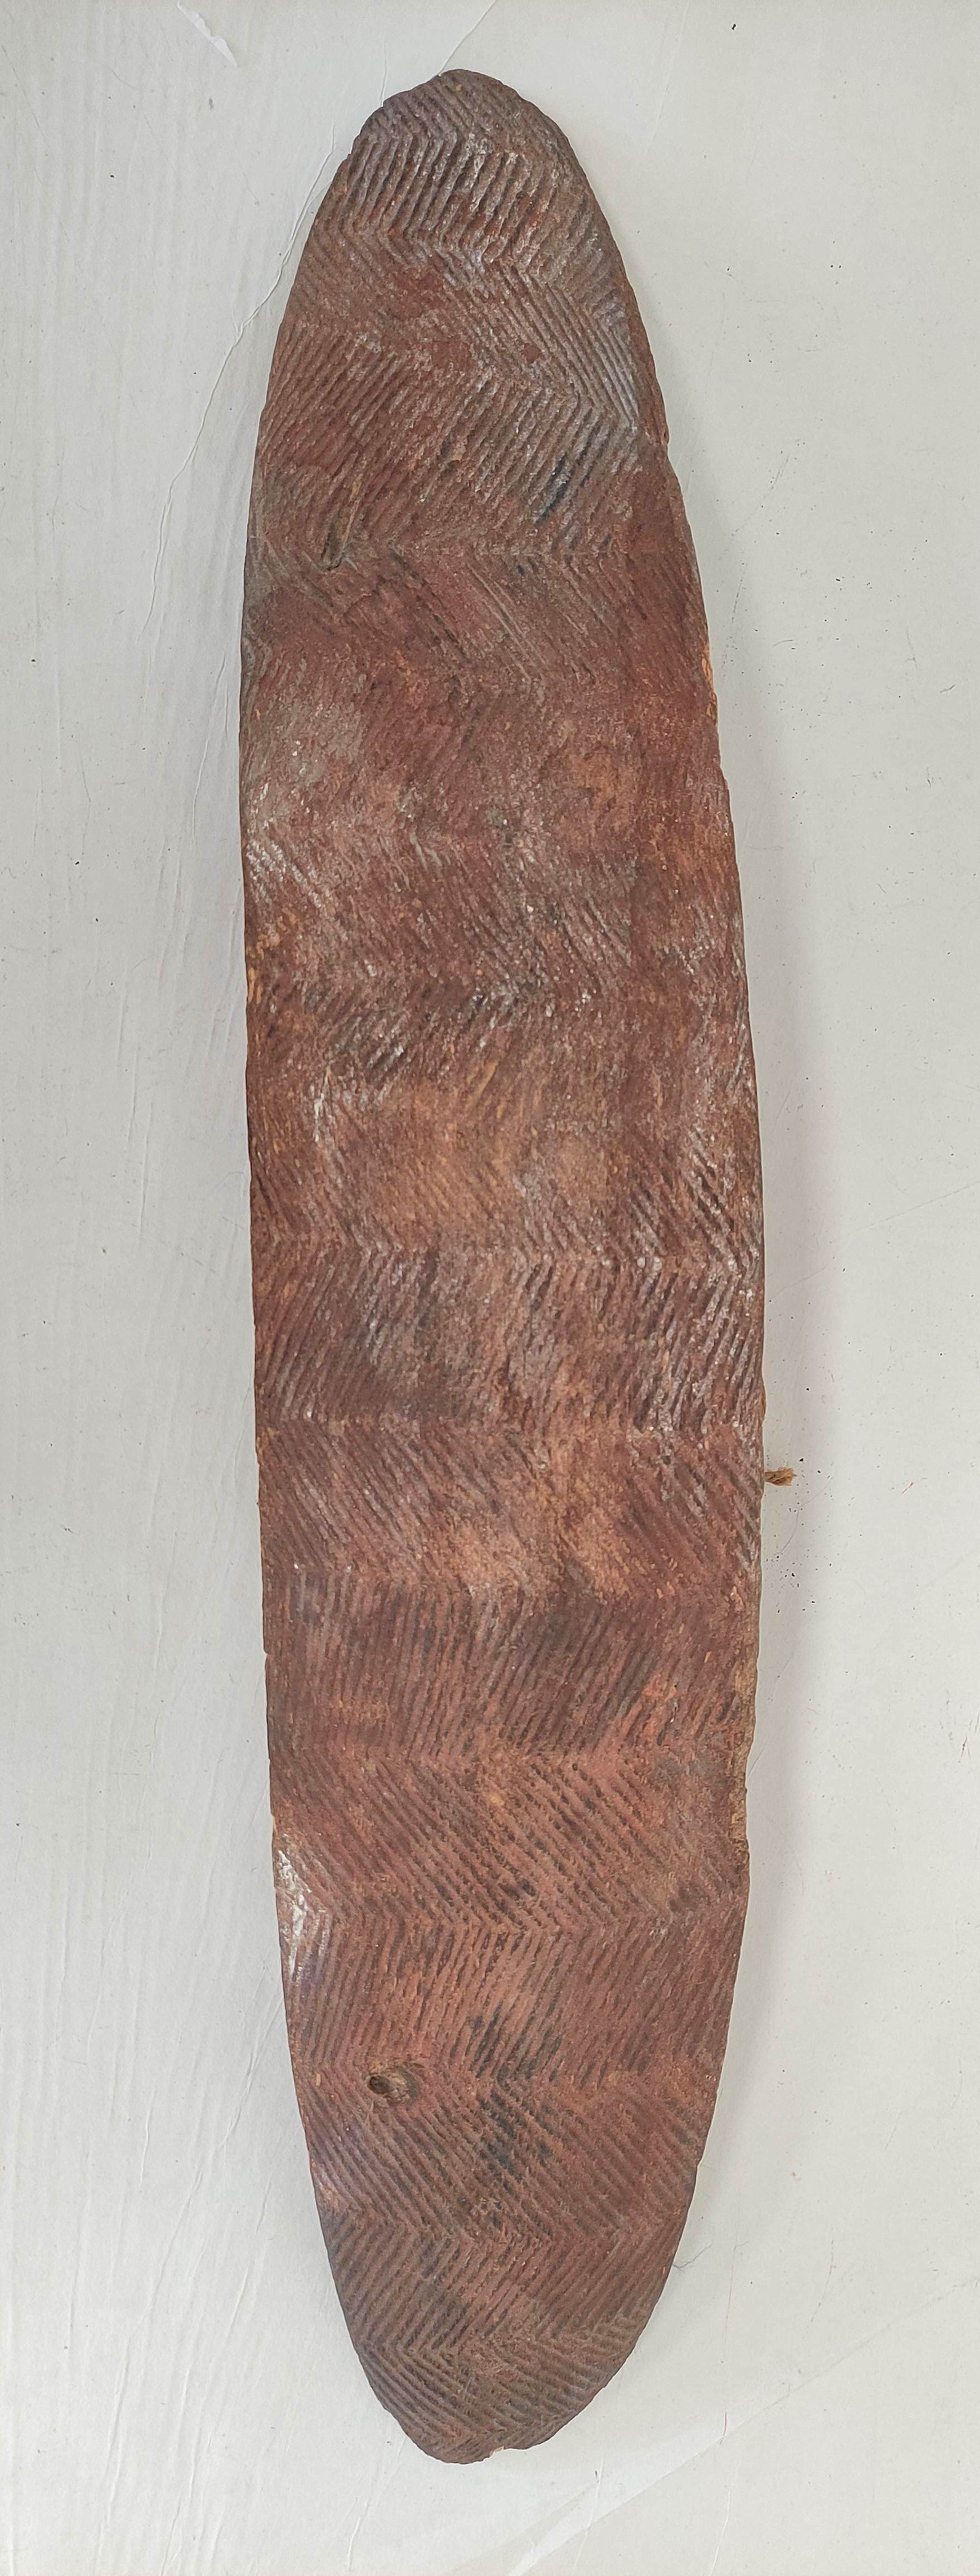 Antique Australian aboriginal wooden Churinga shield of elongated ovoid form and decorated profusely